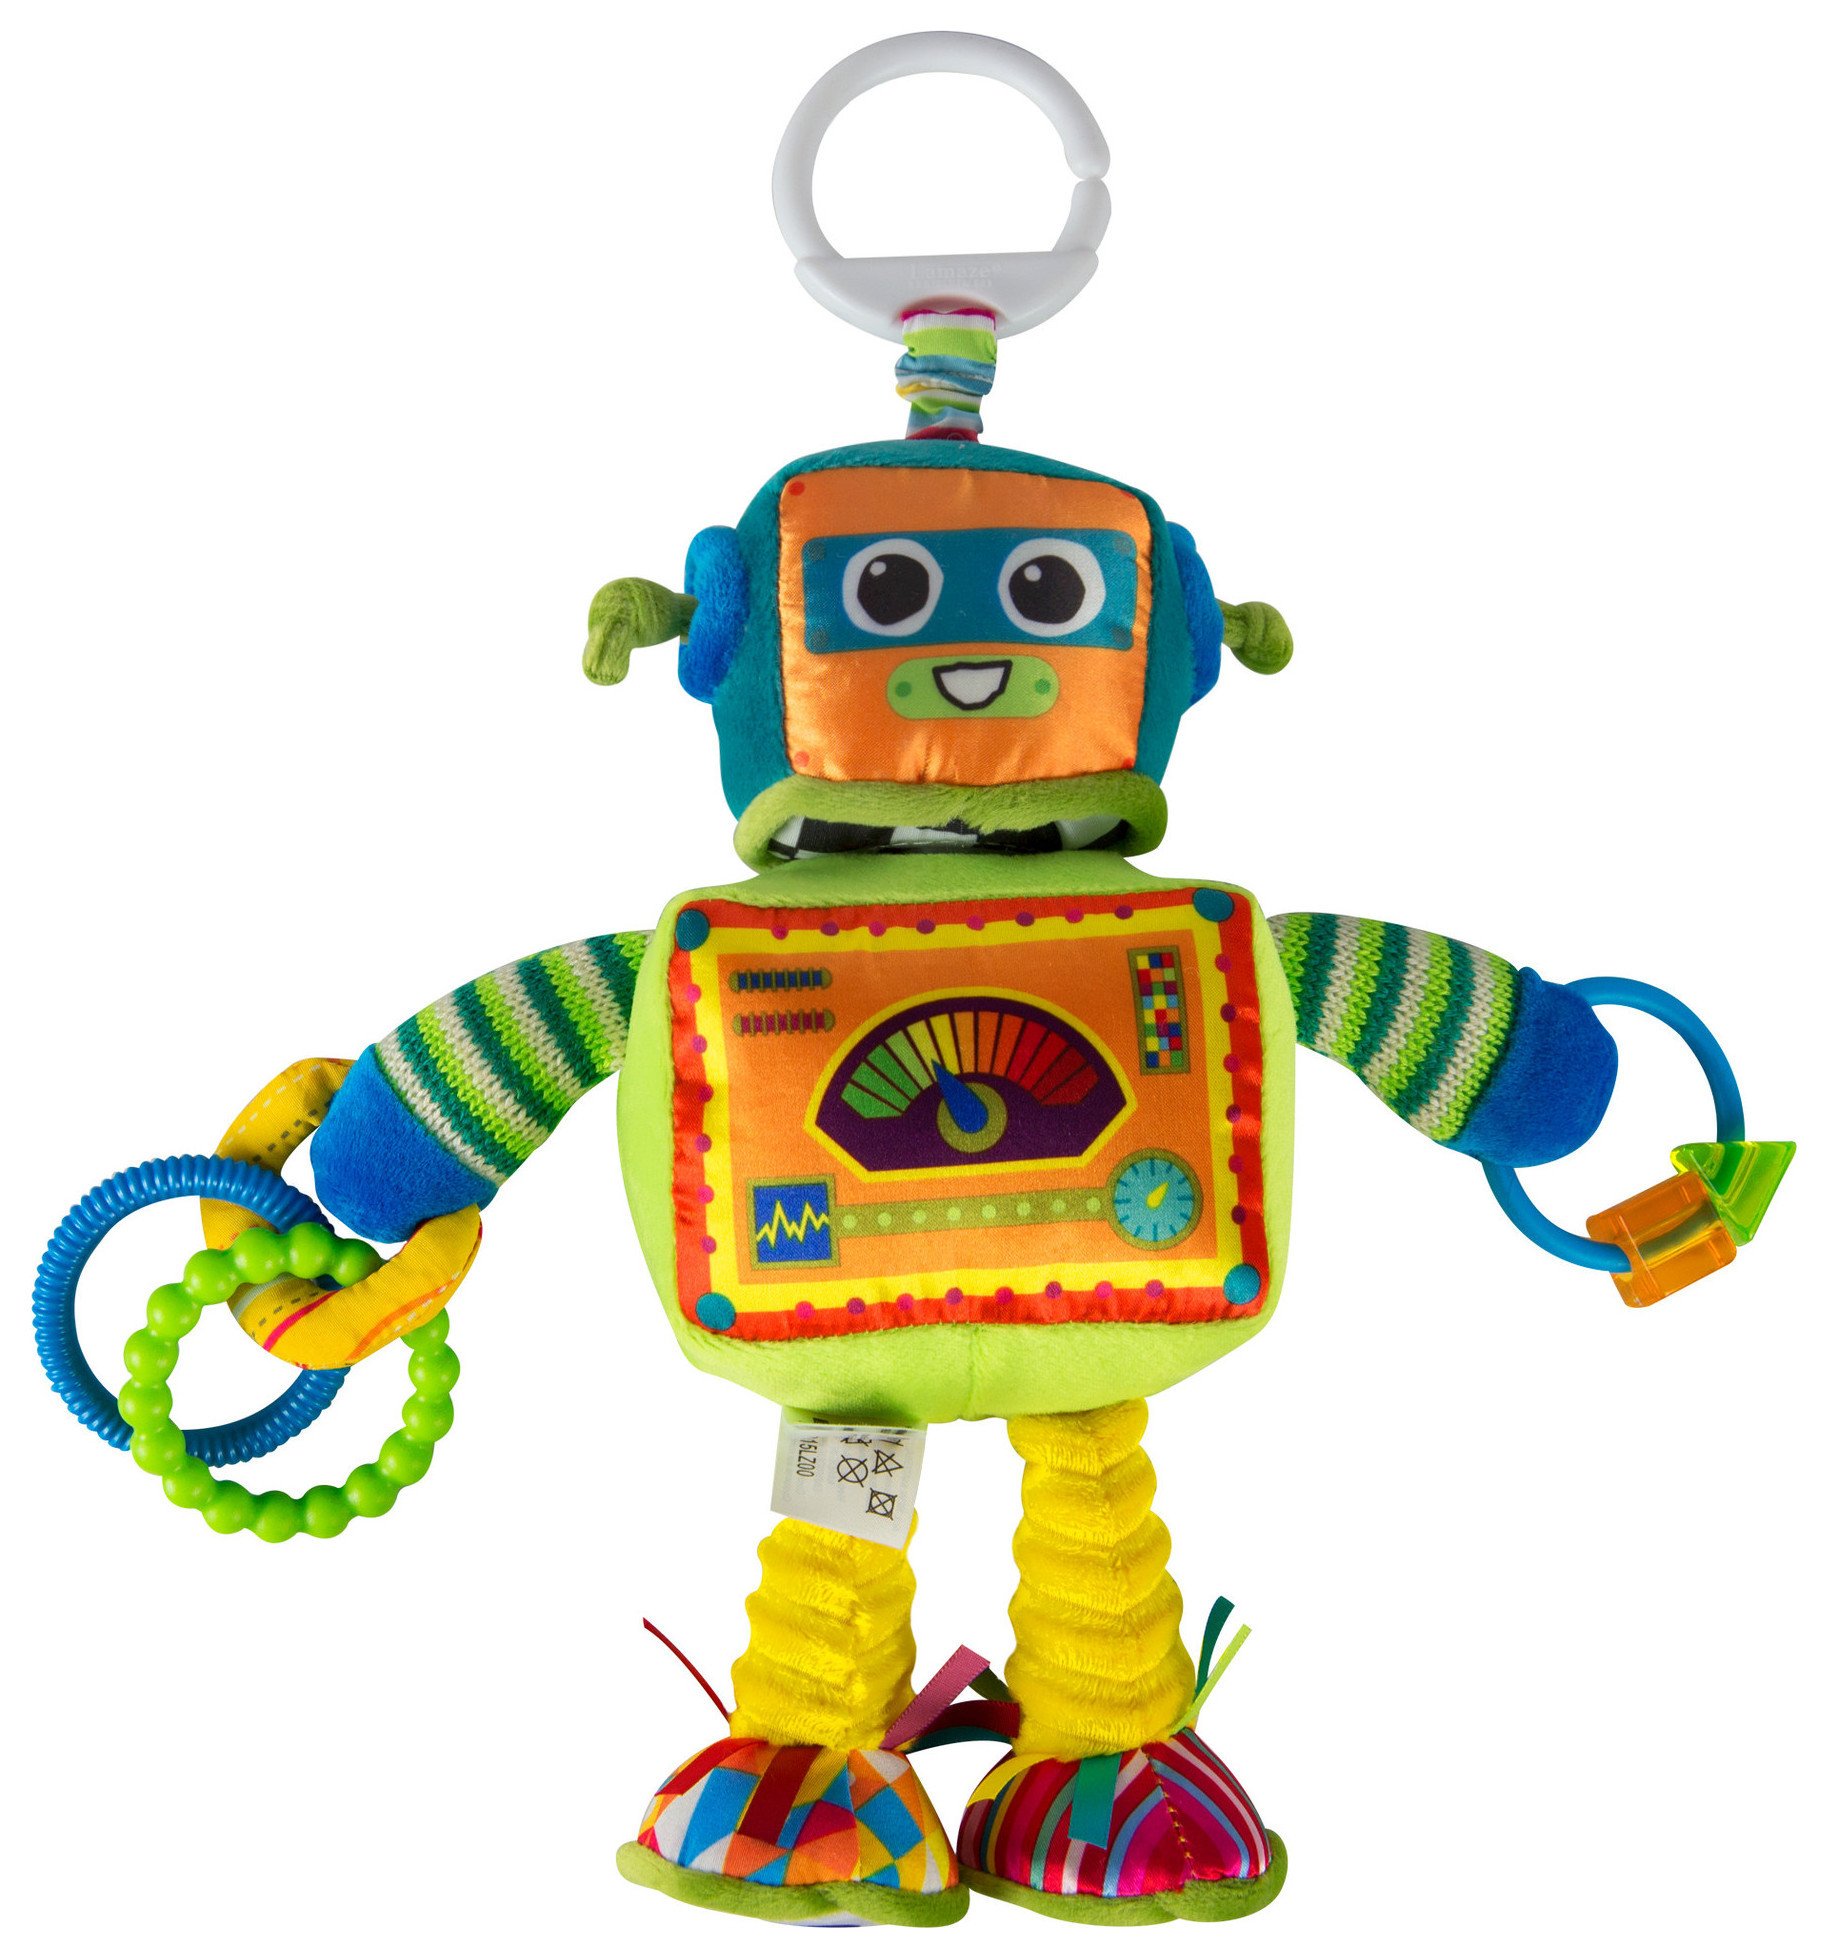 Tomy Lamaze Rusty the Robot. Review